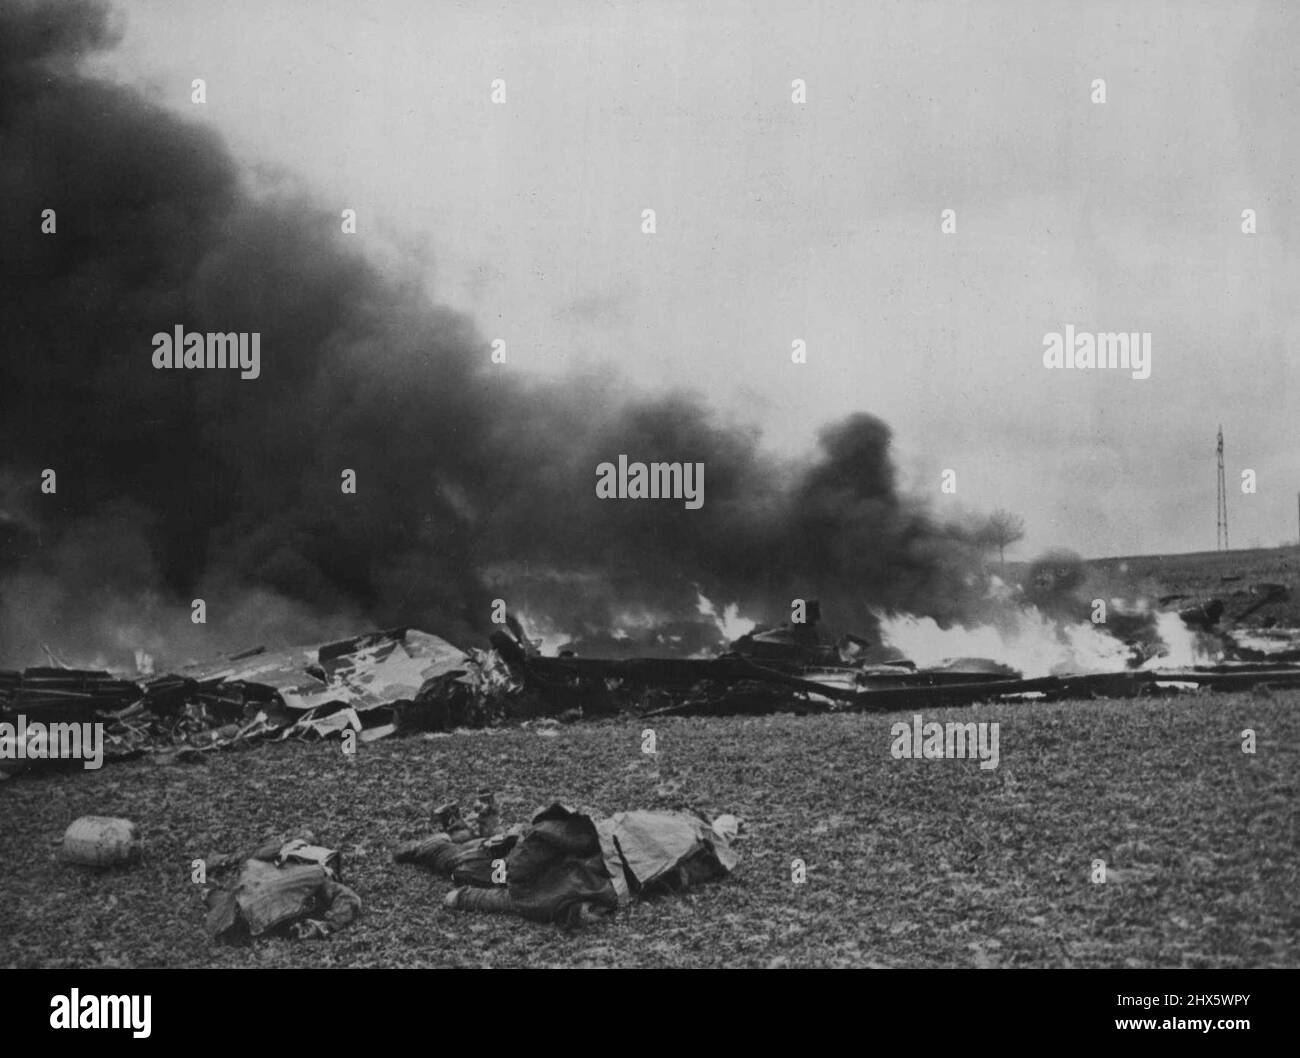 Flaming Death Of U.S. War Plane -- Three dead crew members of a U.S. B-24 Liberator lie next to the blazing wreckage of their bomber somewhere in France. A column of black smoke marks the funeral pyre of, one of the thousands., of American planes supporting the Allied ground offensive against the Germans in Western Europe. January 19, 1945. (Photo by U.S. Office of War Information Picture). Stock Photo